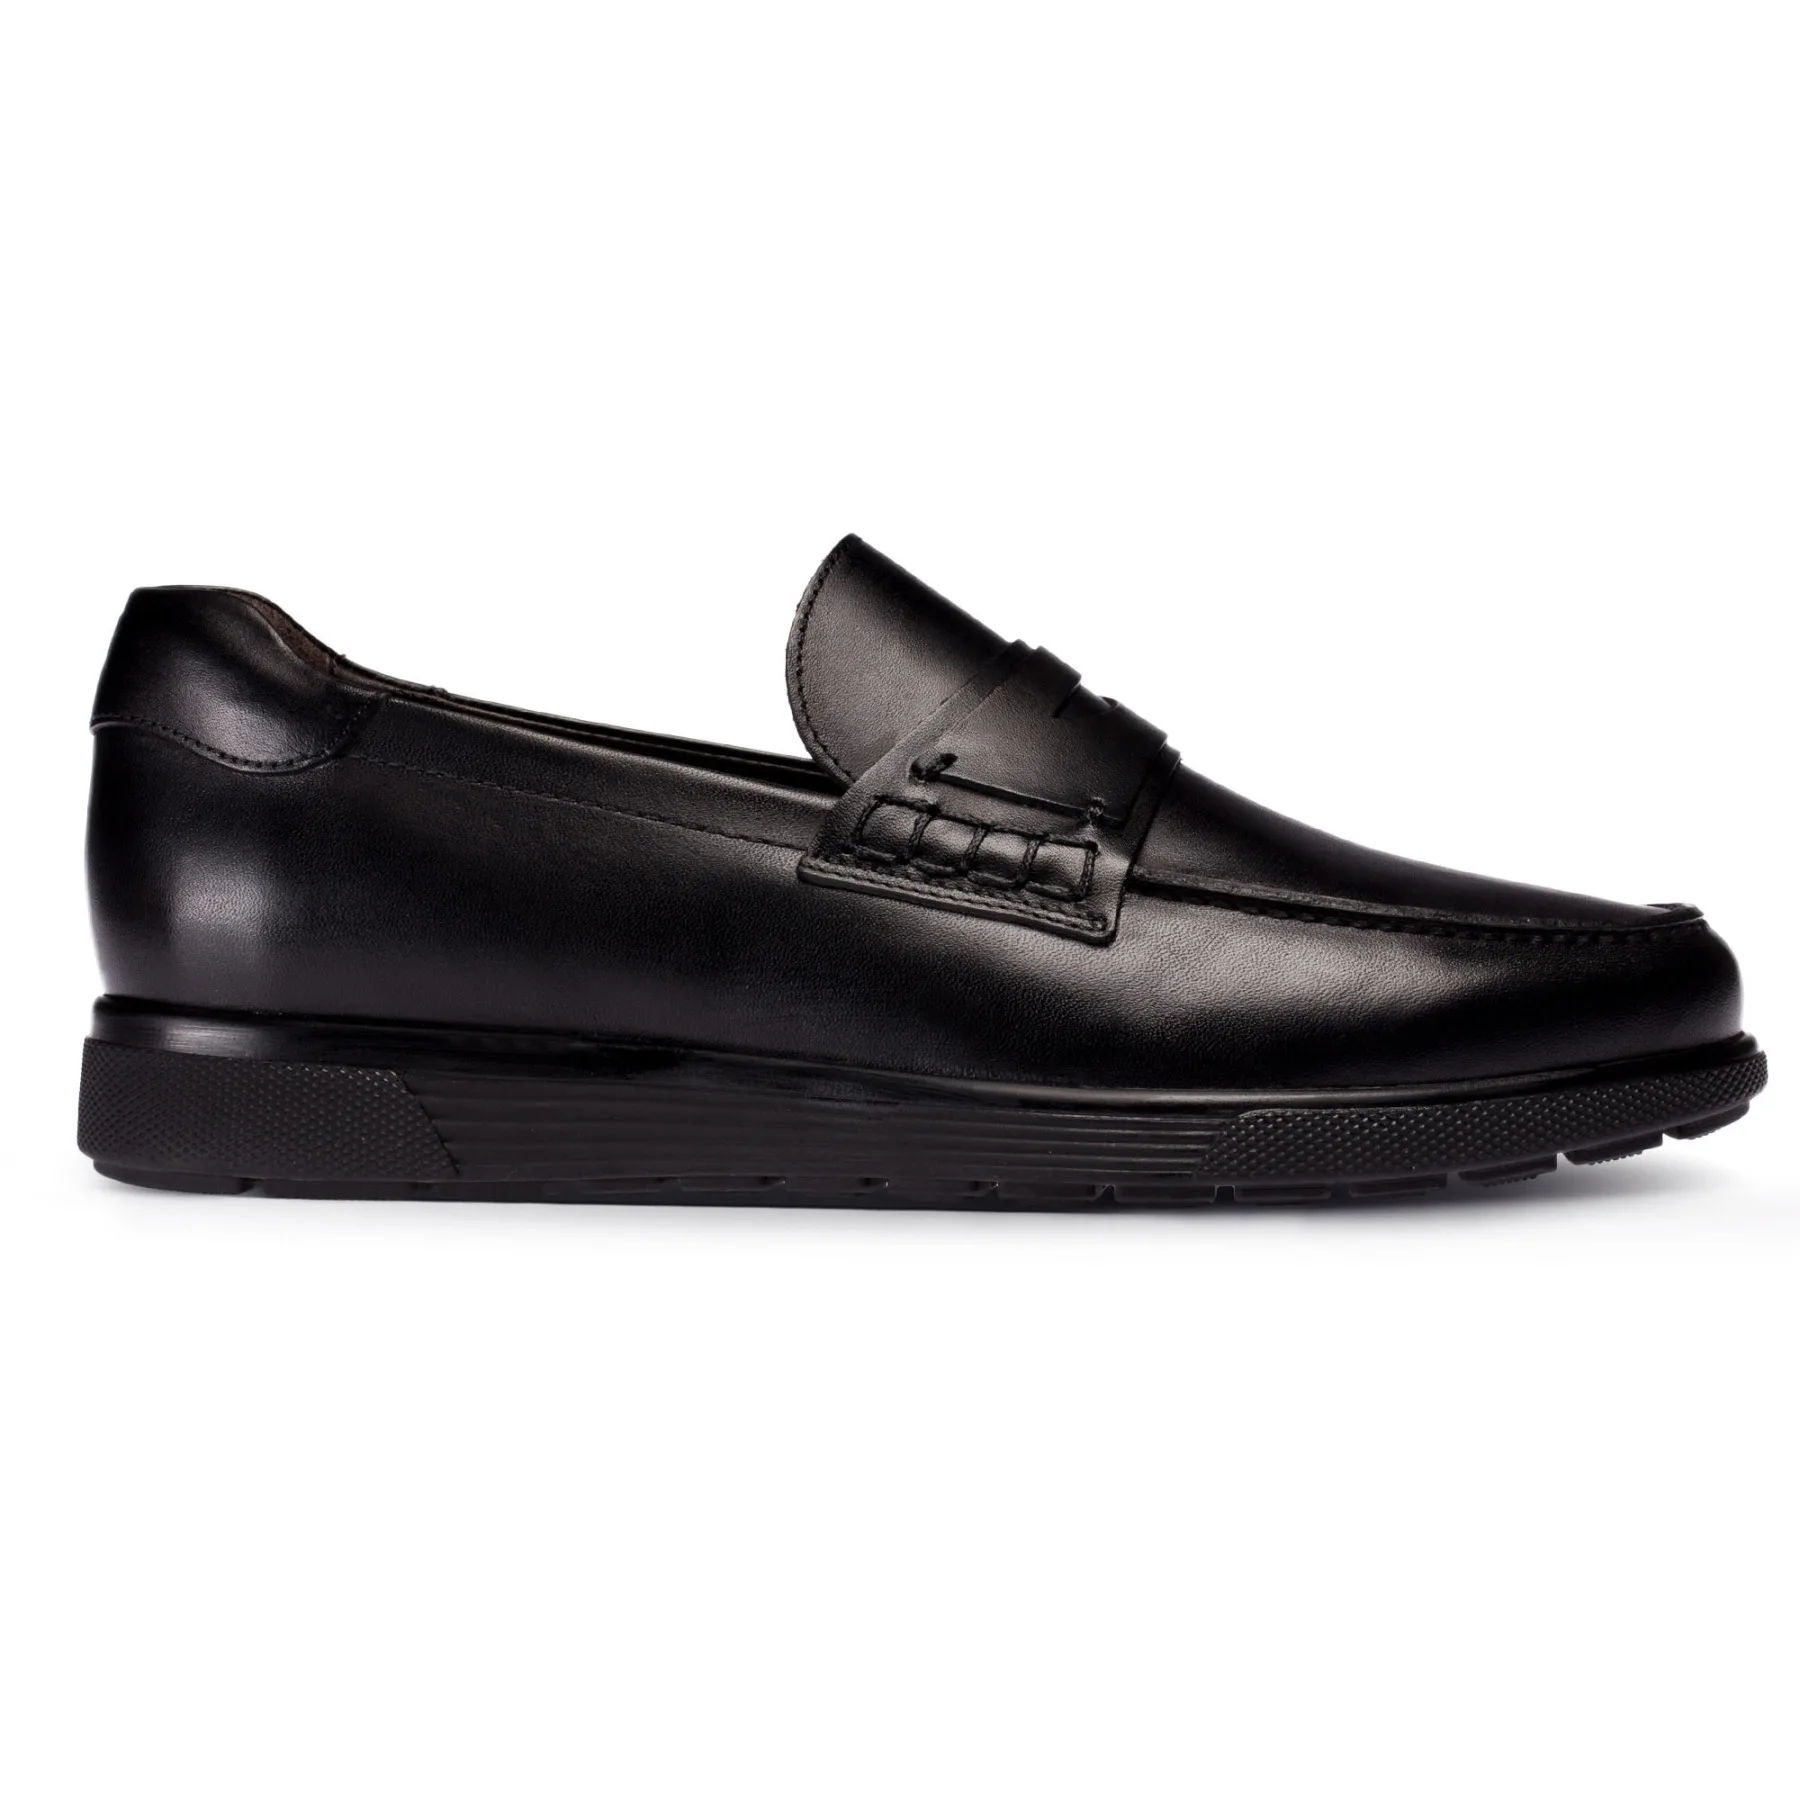 

Deery, Genuine Leather Men Black Calfskin Leather Loafers Moccasins Breathable Slip on Flats Male Driving Shoes 2021